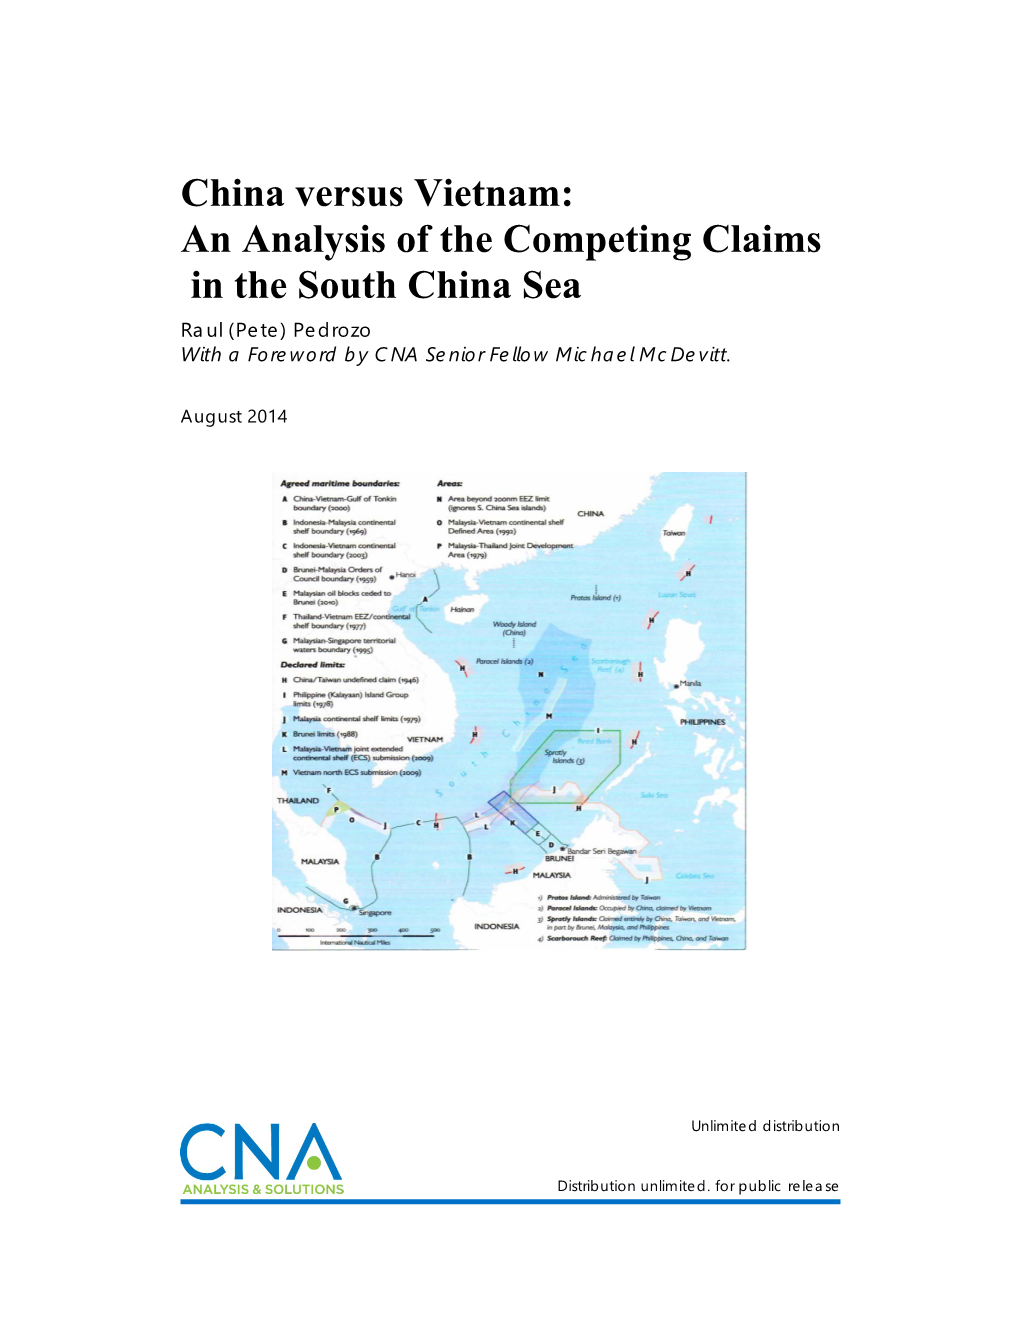 China Versus Vietnam: an Analysis of the Competing Claims in the South China Sea Raul (Pete) Pedrozo with a Foreword by CNA Senior Fellow Michael Mcdevitt